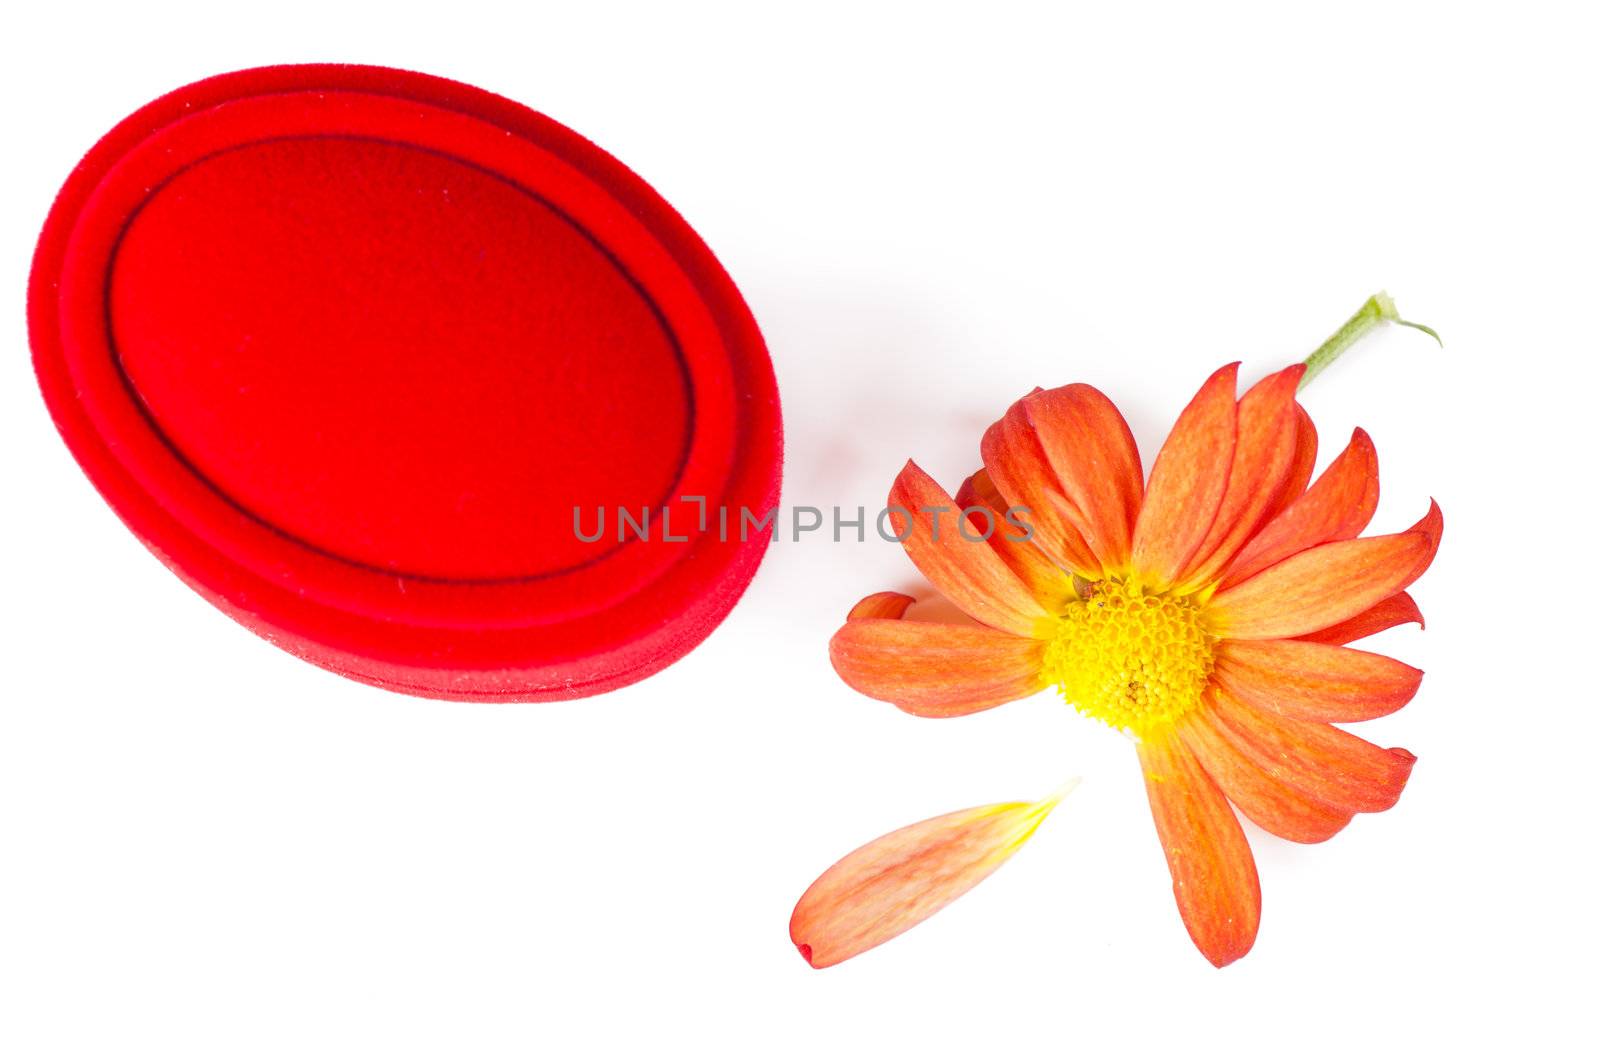 Red box and chrysanthemum without one petal